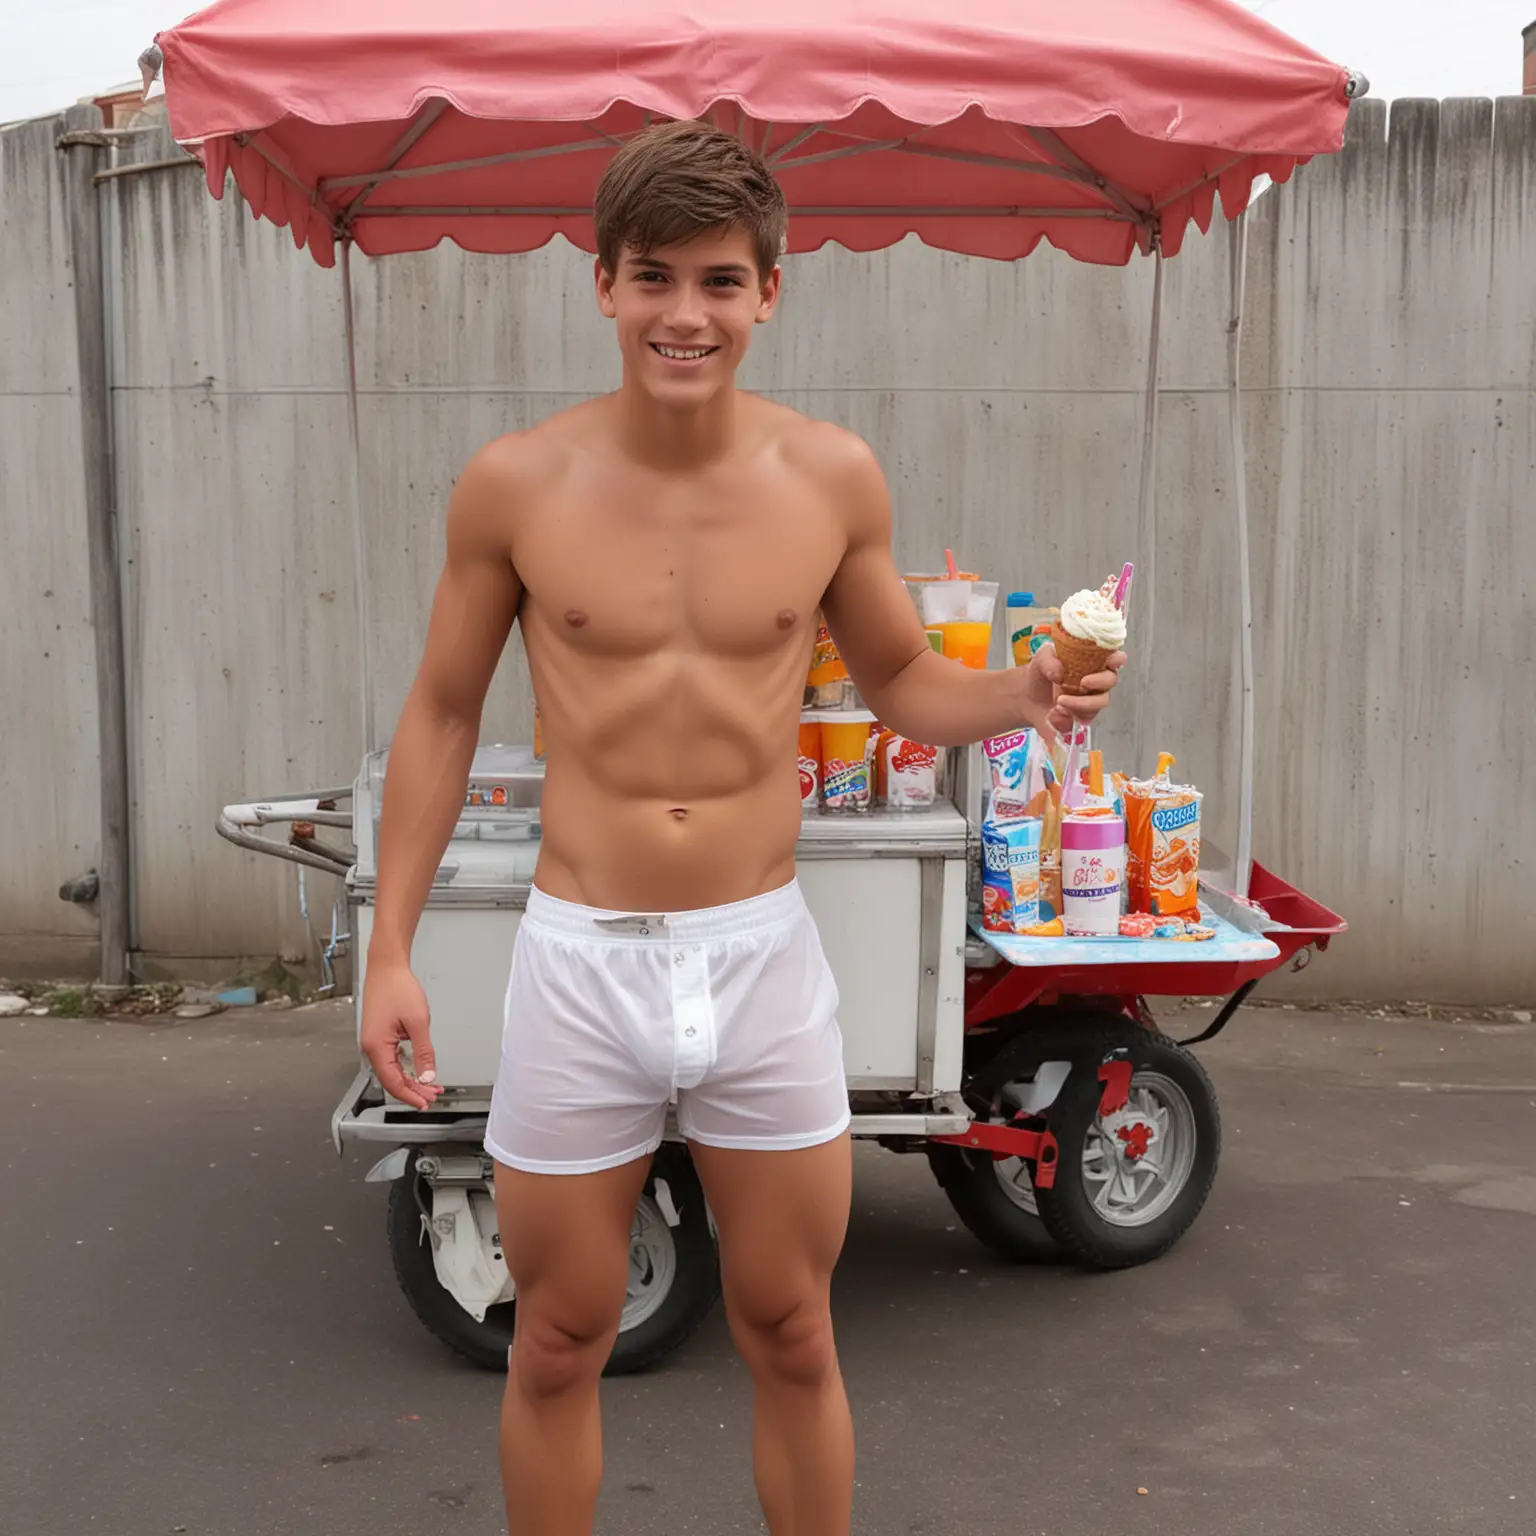 Young Shirtless Boy Selling Popsicles from Ice Cream Cart